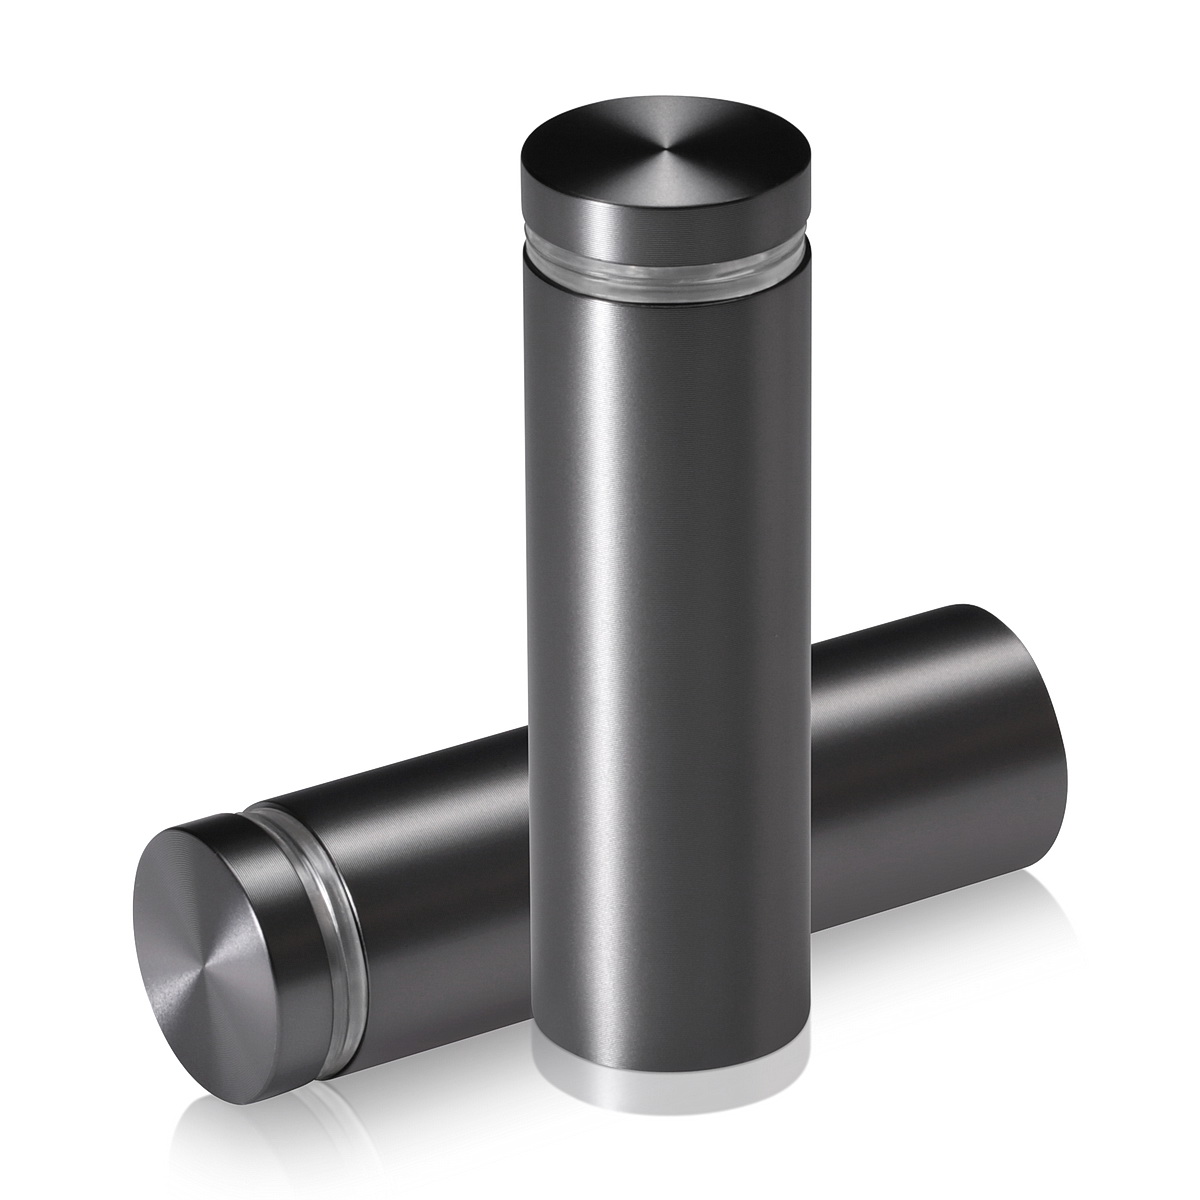 7/8'' Diameter X 2-1/2'' Barrel Length, Aluminum Flat Head Standoffs, Titanium Anodized Finish Easy Fasten Standoff (For Inside / Outside use) Tamper Proof Standoff [Required Material Hole Size: 7/16'']